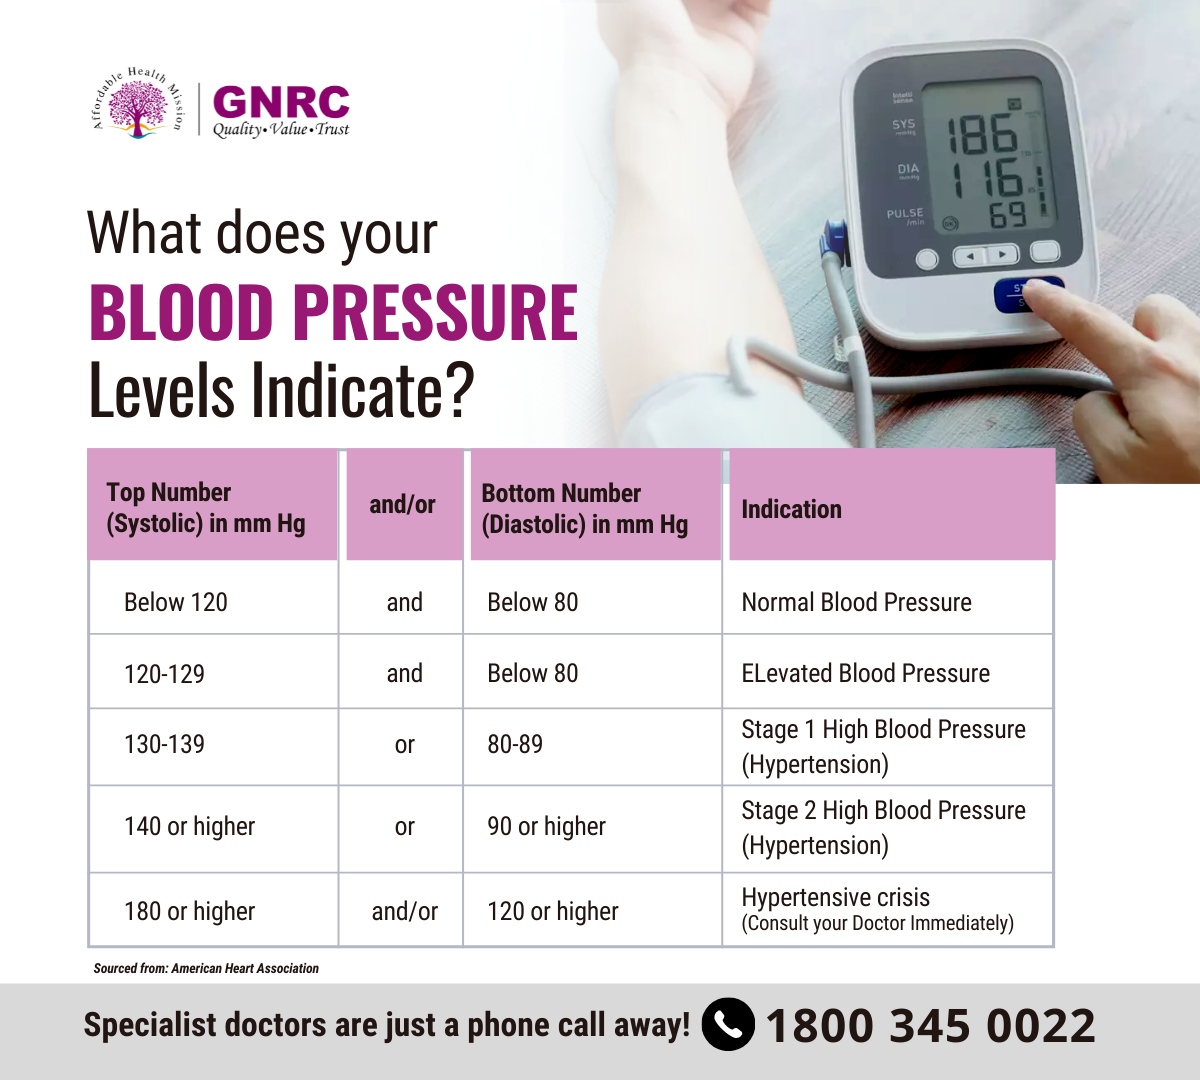 Know what your blood pressure levels indicate